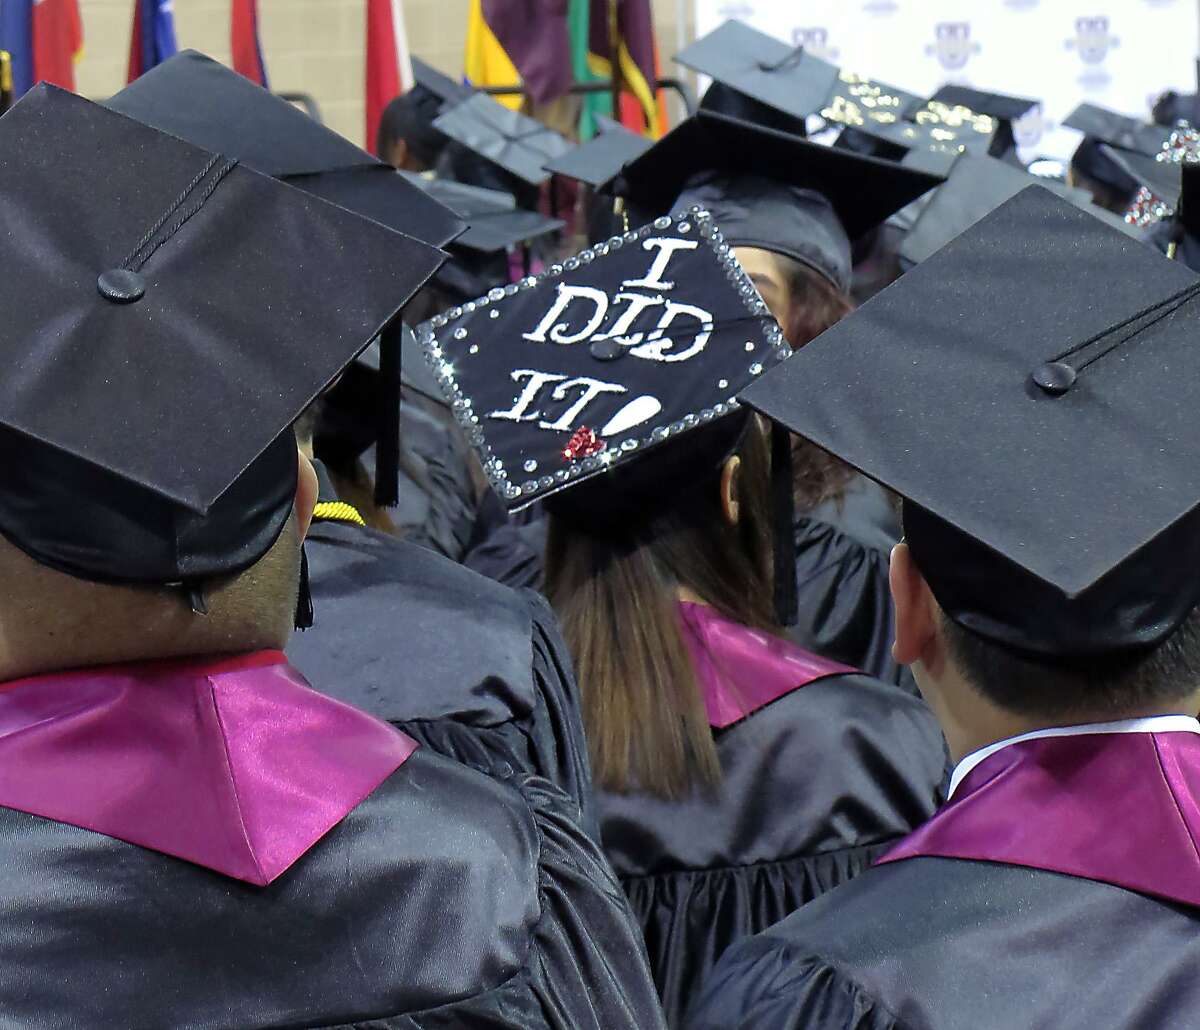 A graduate expresses her sentiments on her graduation cap as she participates in TAMIU's Fall Commencement Exercises were held Friday in the Kinesiology-Convocation Building. Click through to see the best graduate programs in the U.S. for 2017.